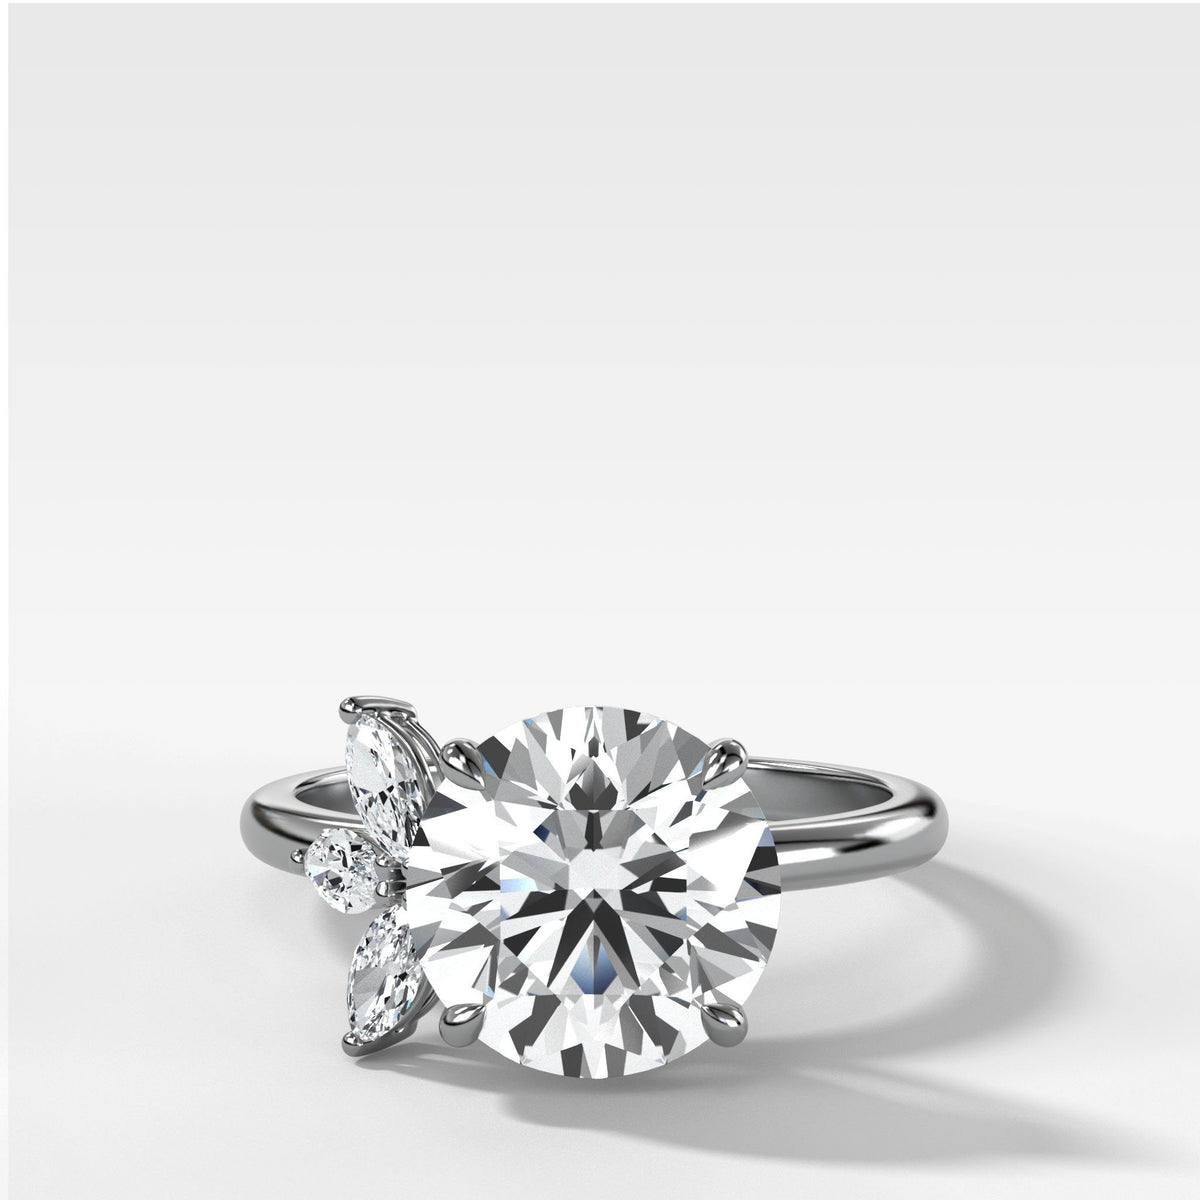 Purchase the High-Quality Round Engagement Rings